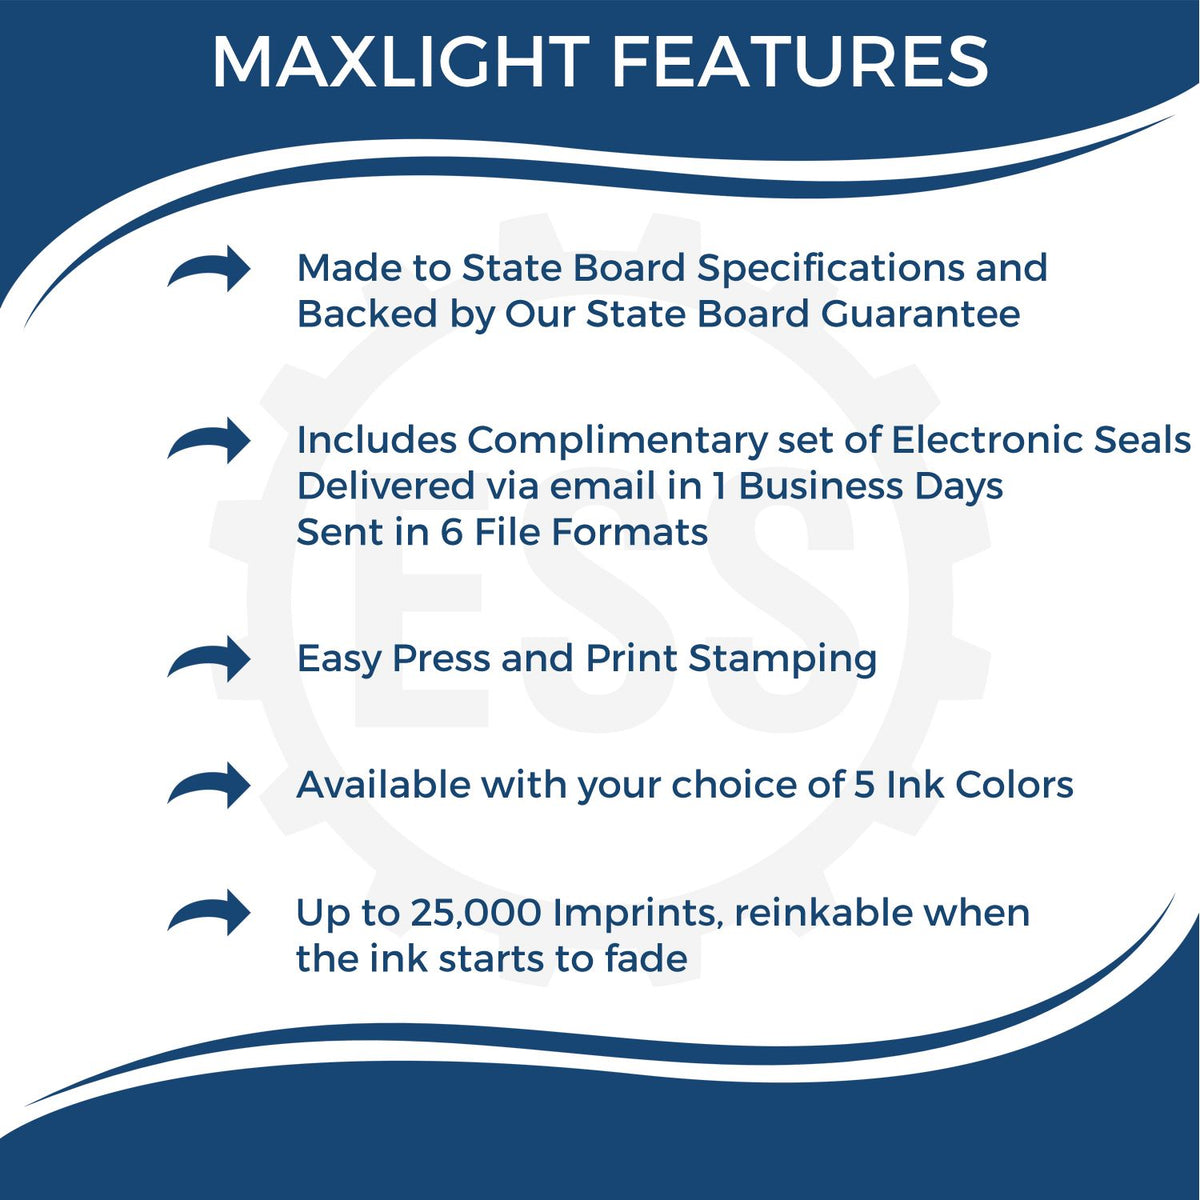 A picture of an infographic highlighting the selling points for the Premium MaxLight Pre-Inked Rhode Is Landscape Architects Stamp